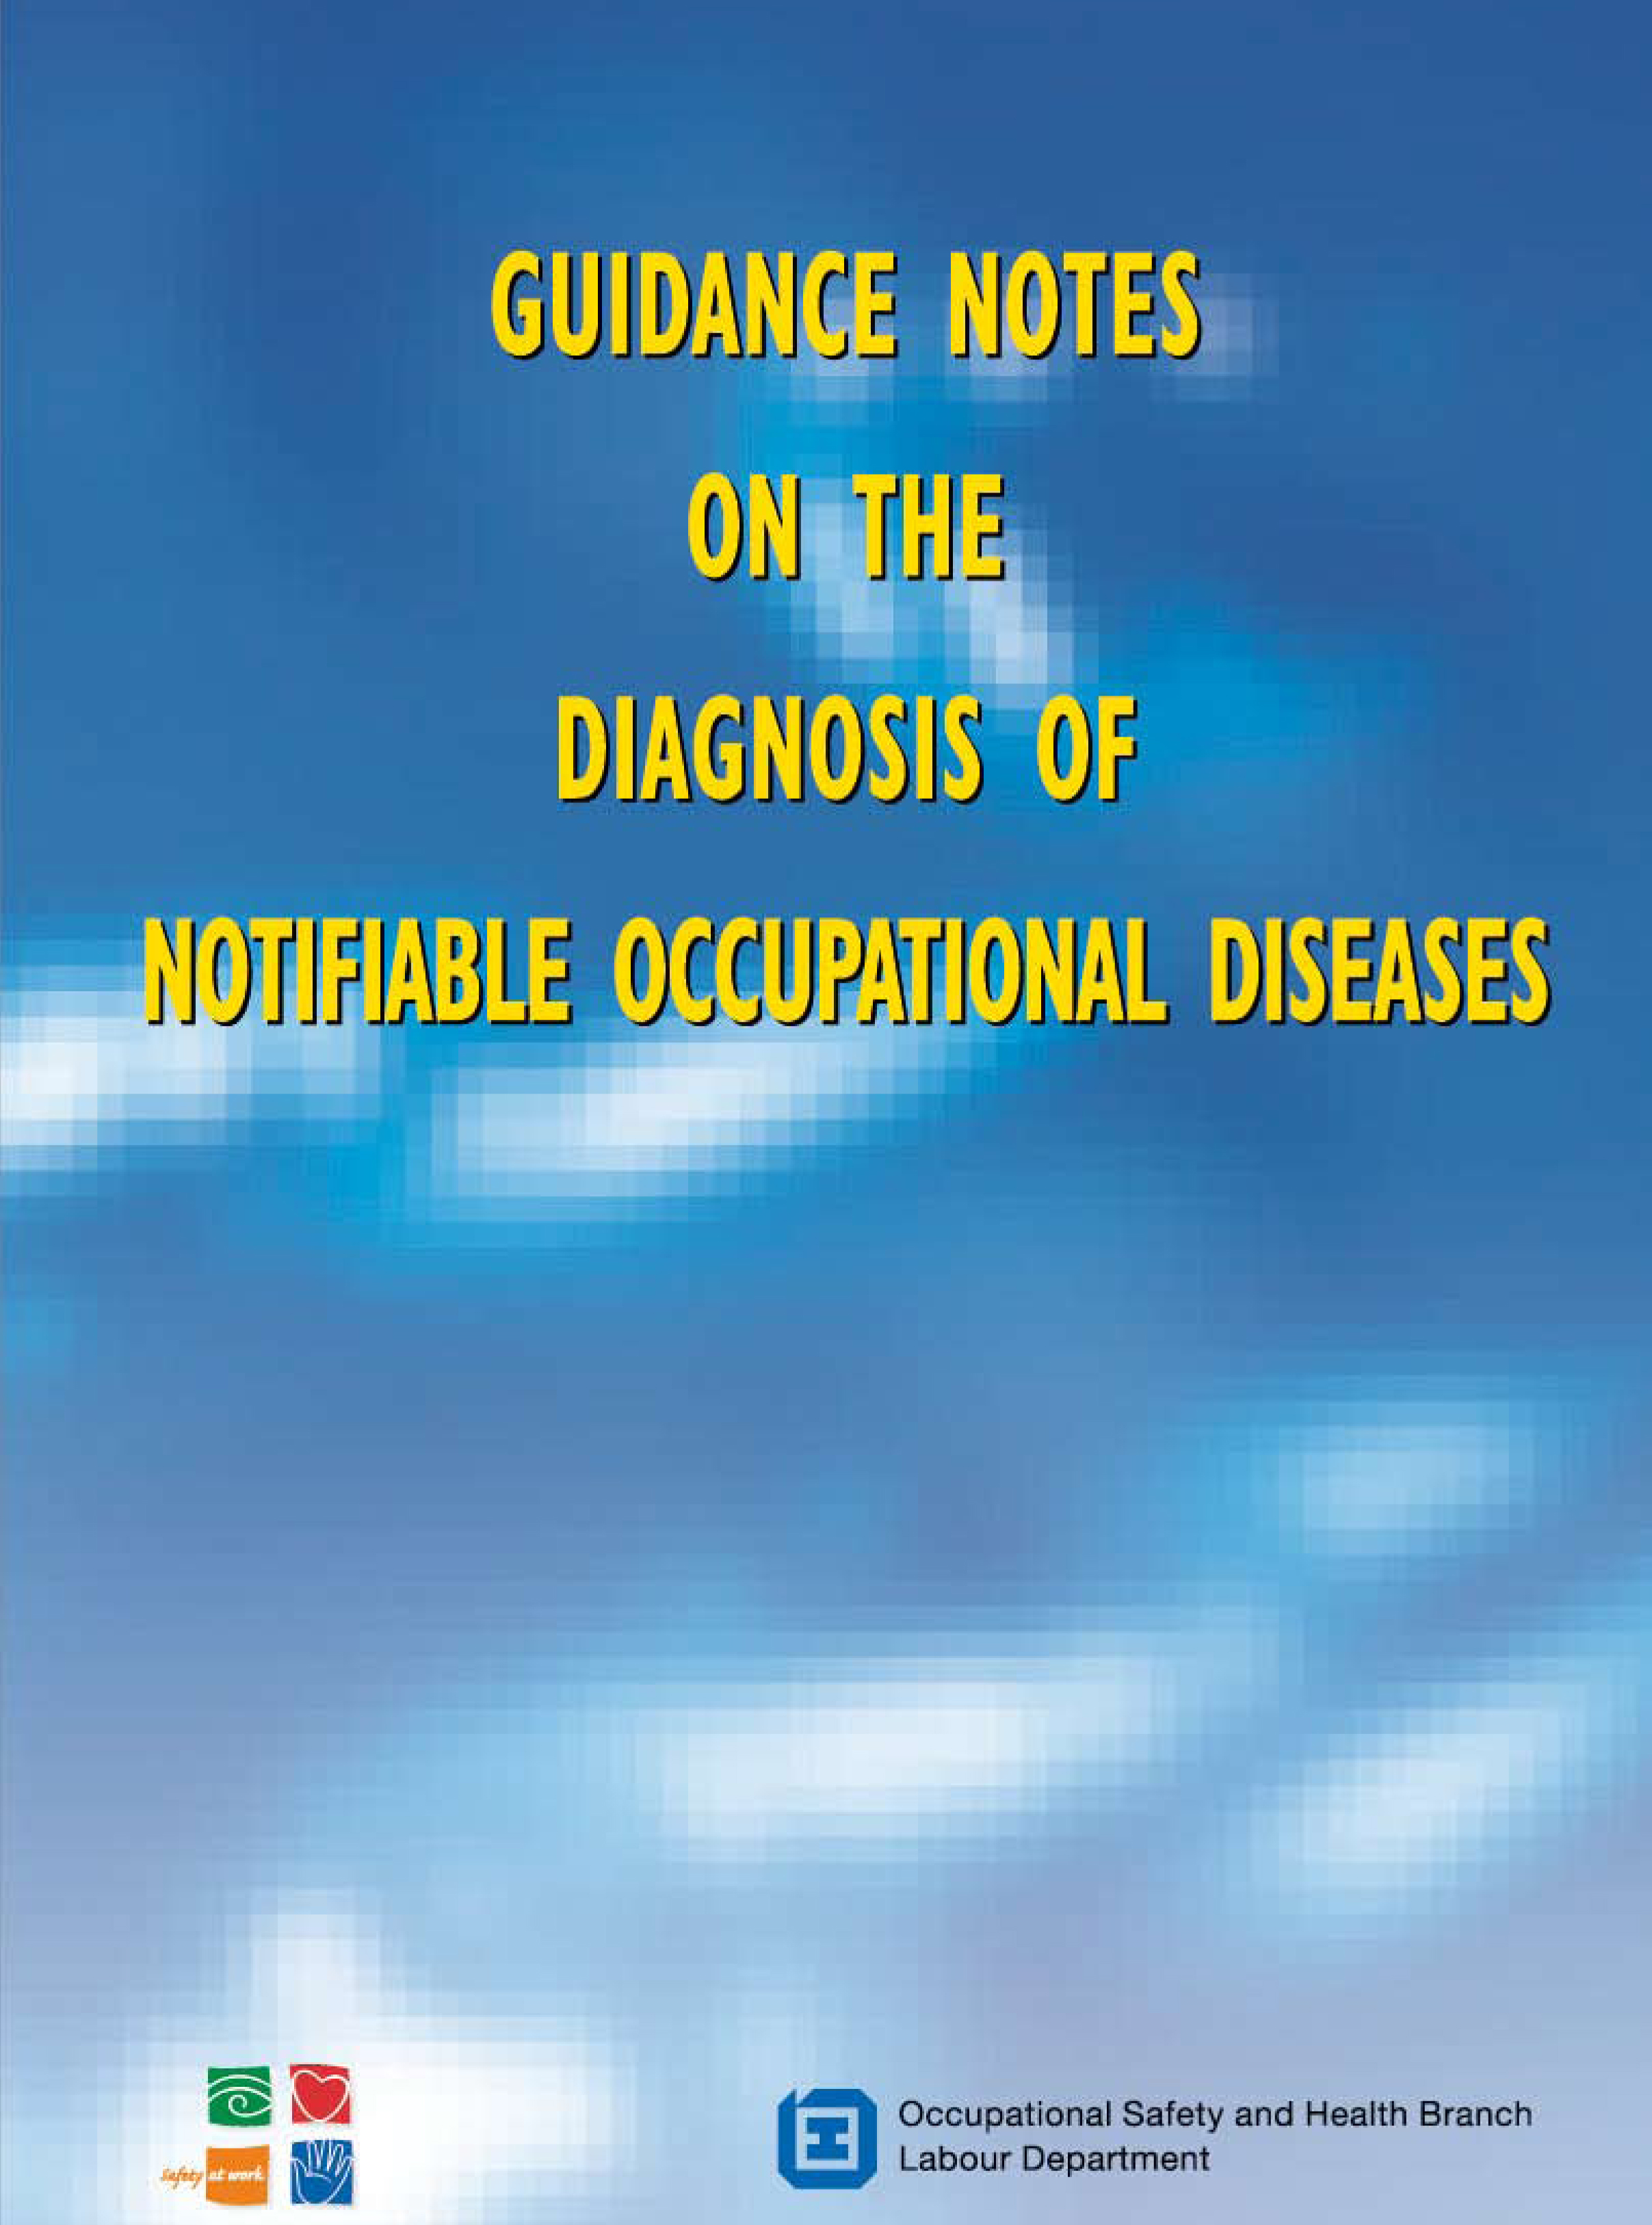 Guidance Notes on the Diagnosis of Notifiable Occupational Diseases(published by the Labour Department)